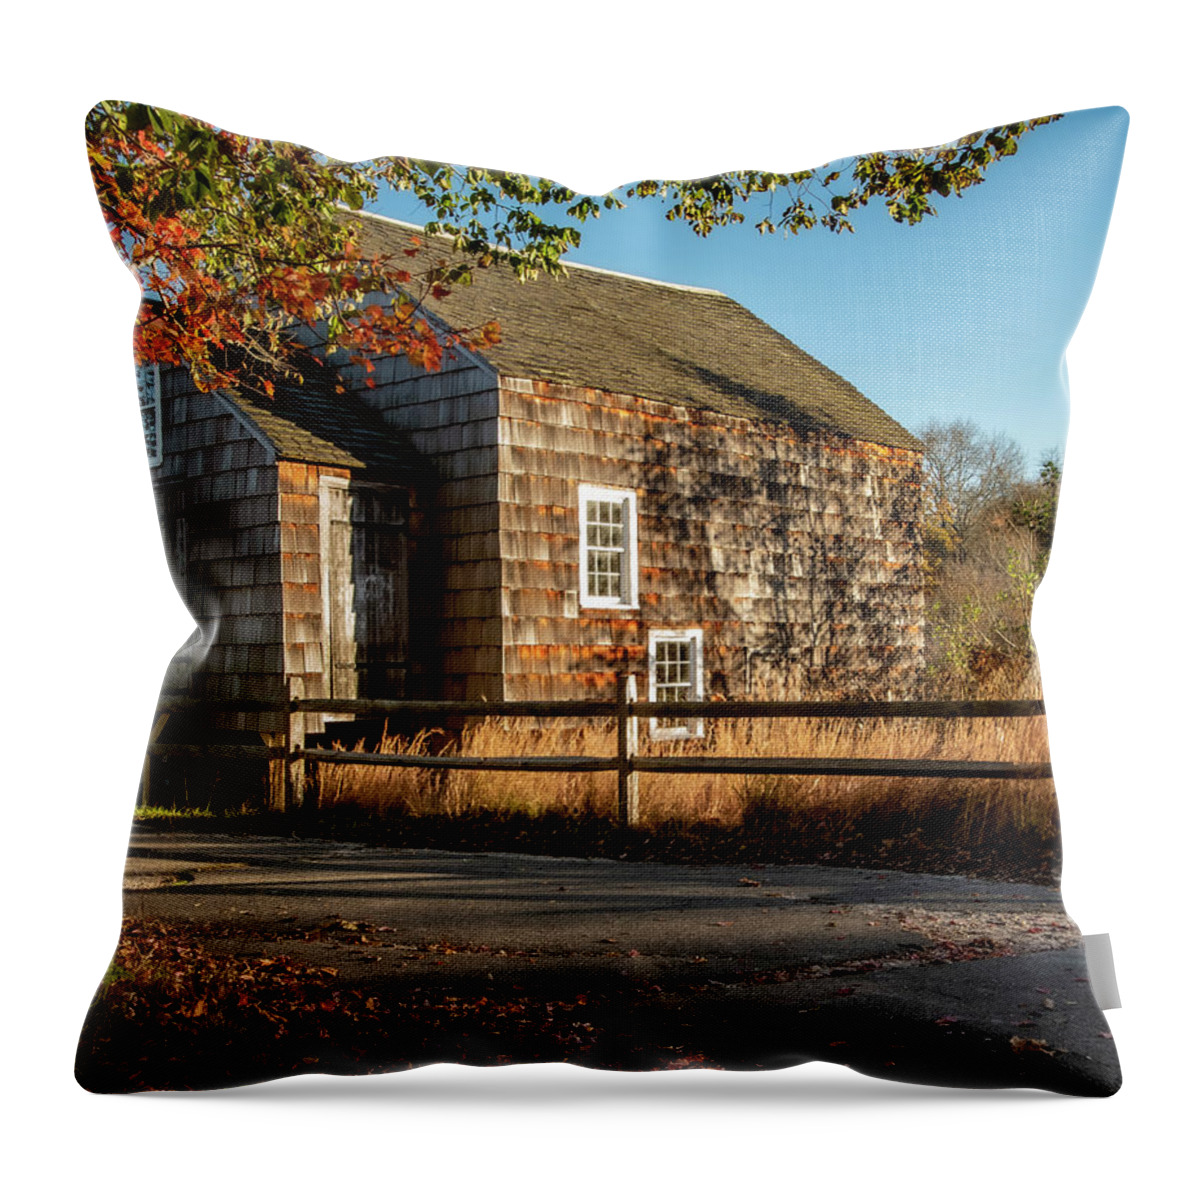 Grist Mill Throw Pillow featuring the photograph Nicoll Grist Mill by Cathy Kovarik